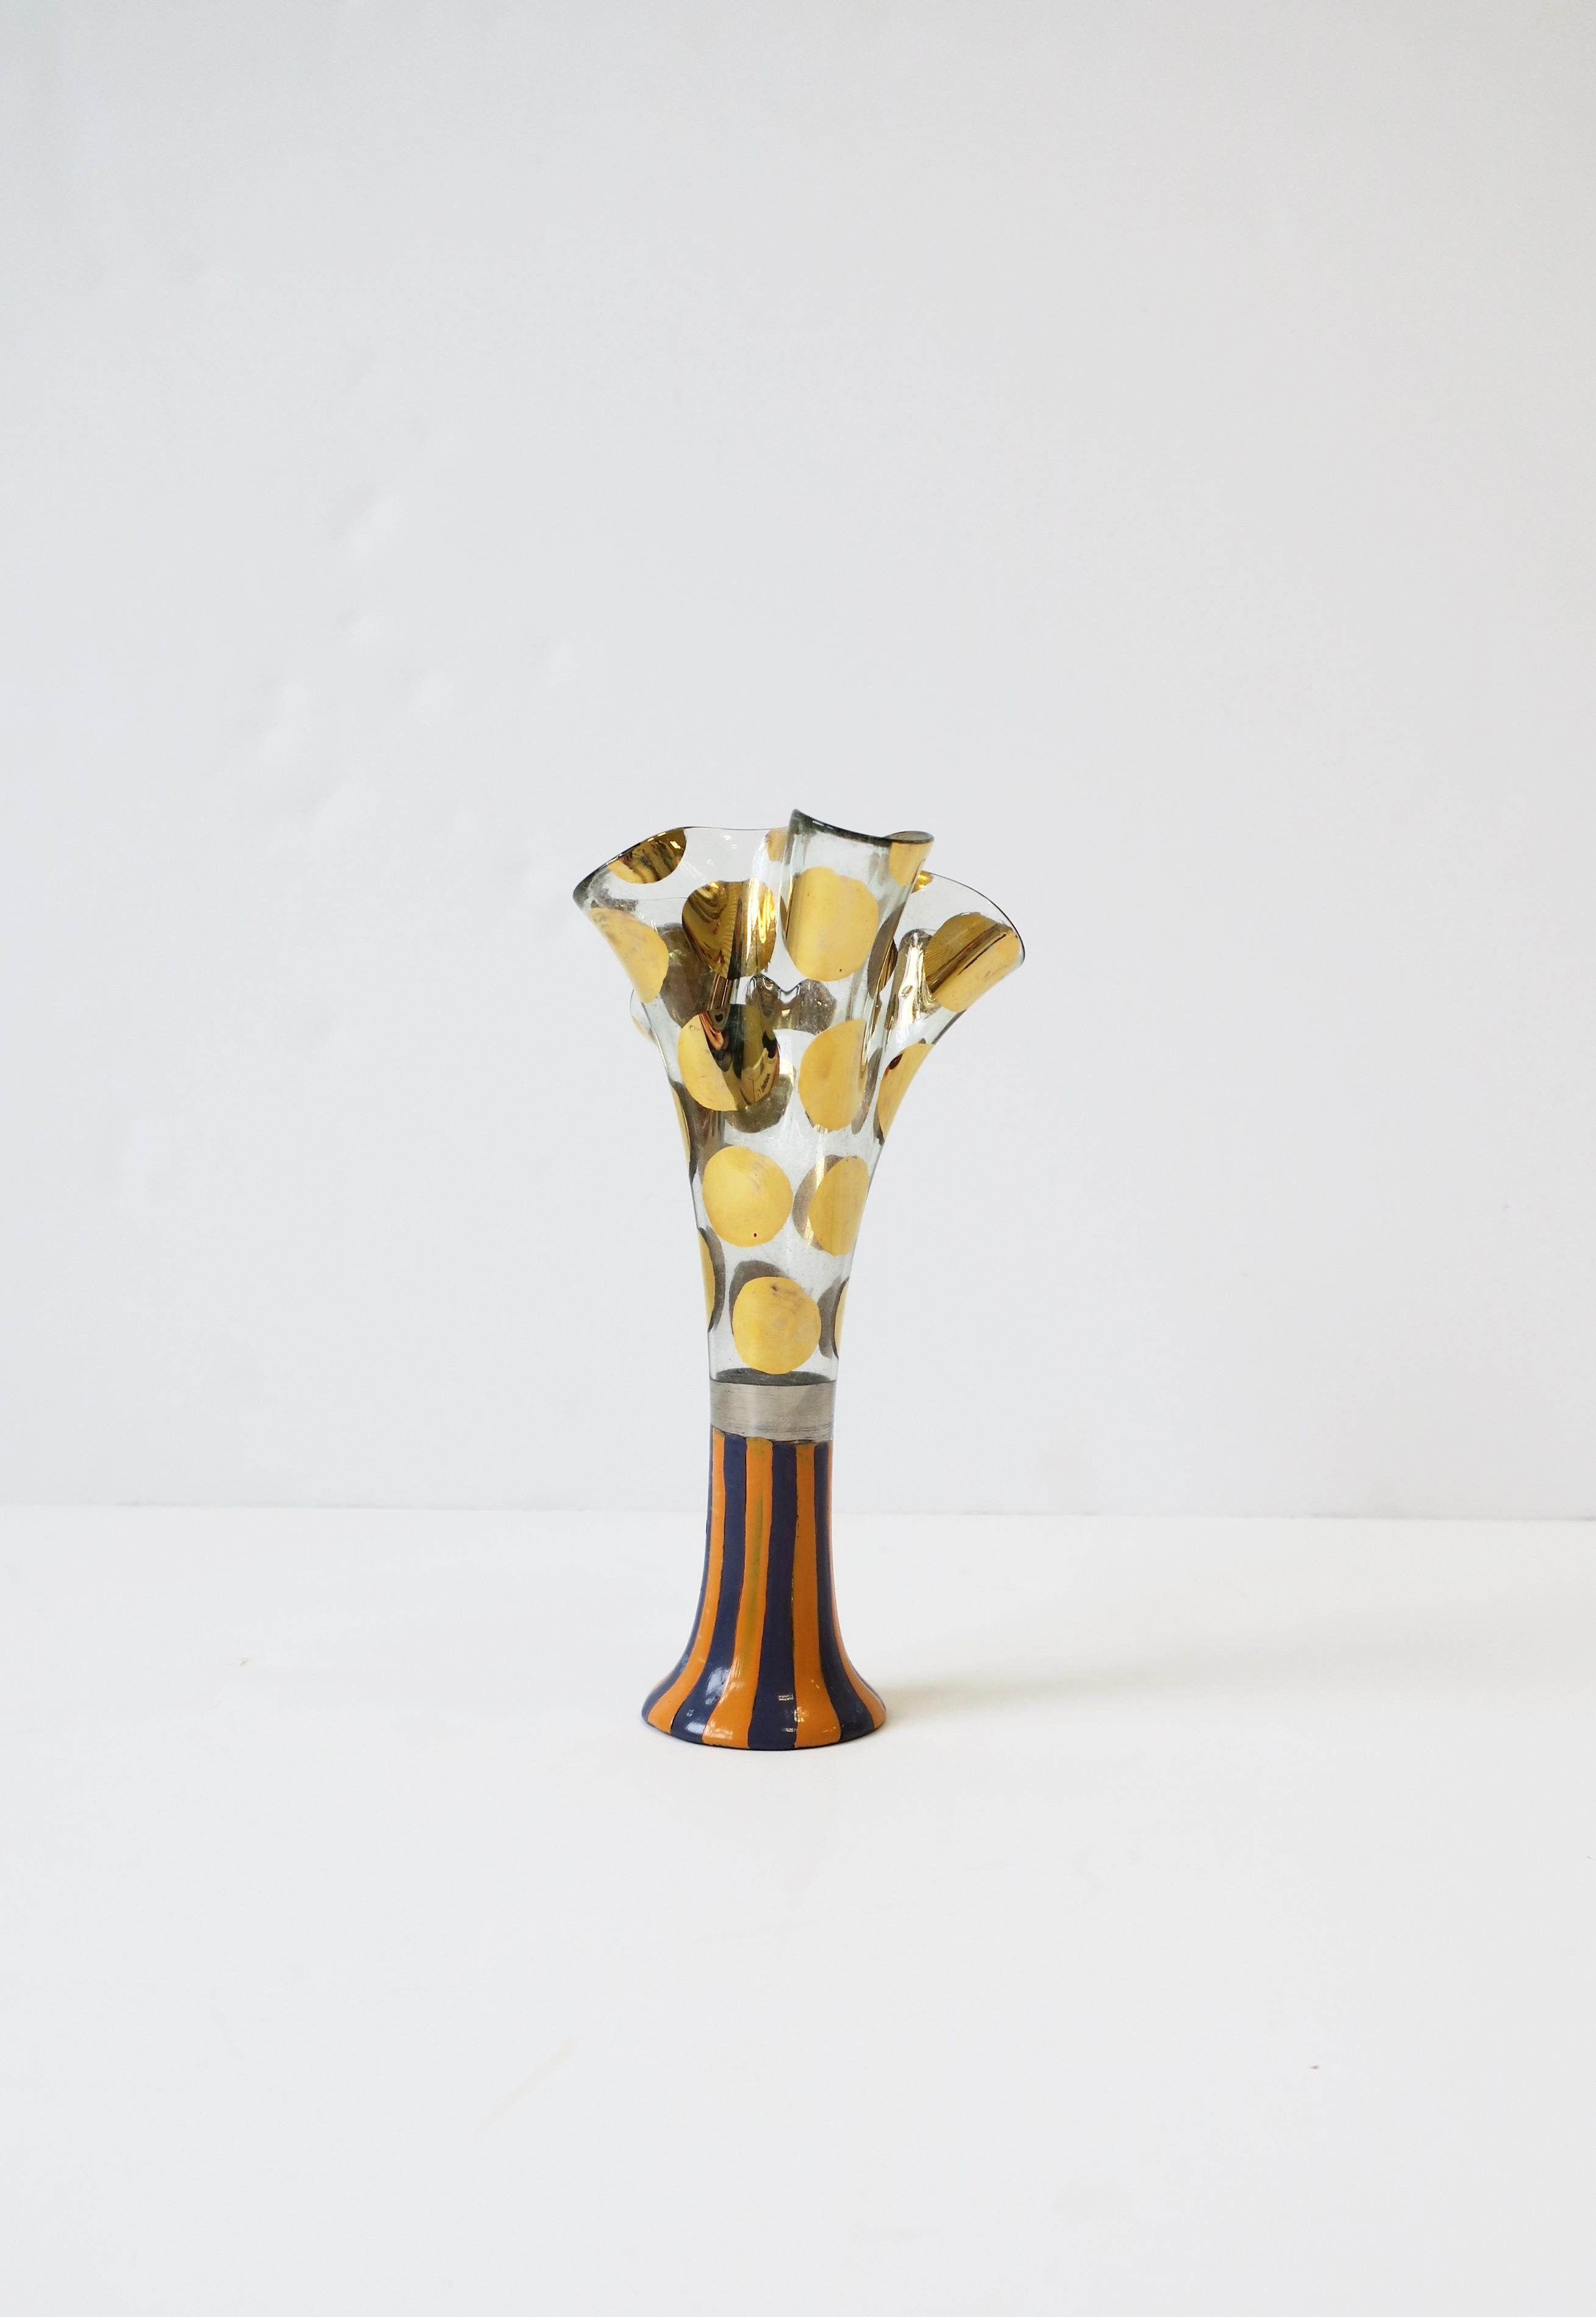 Mackenzie-Childs Art Glass Vase with Gold Polka Dots, circa 1980s For Sale 2